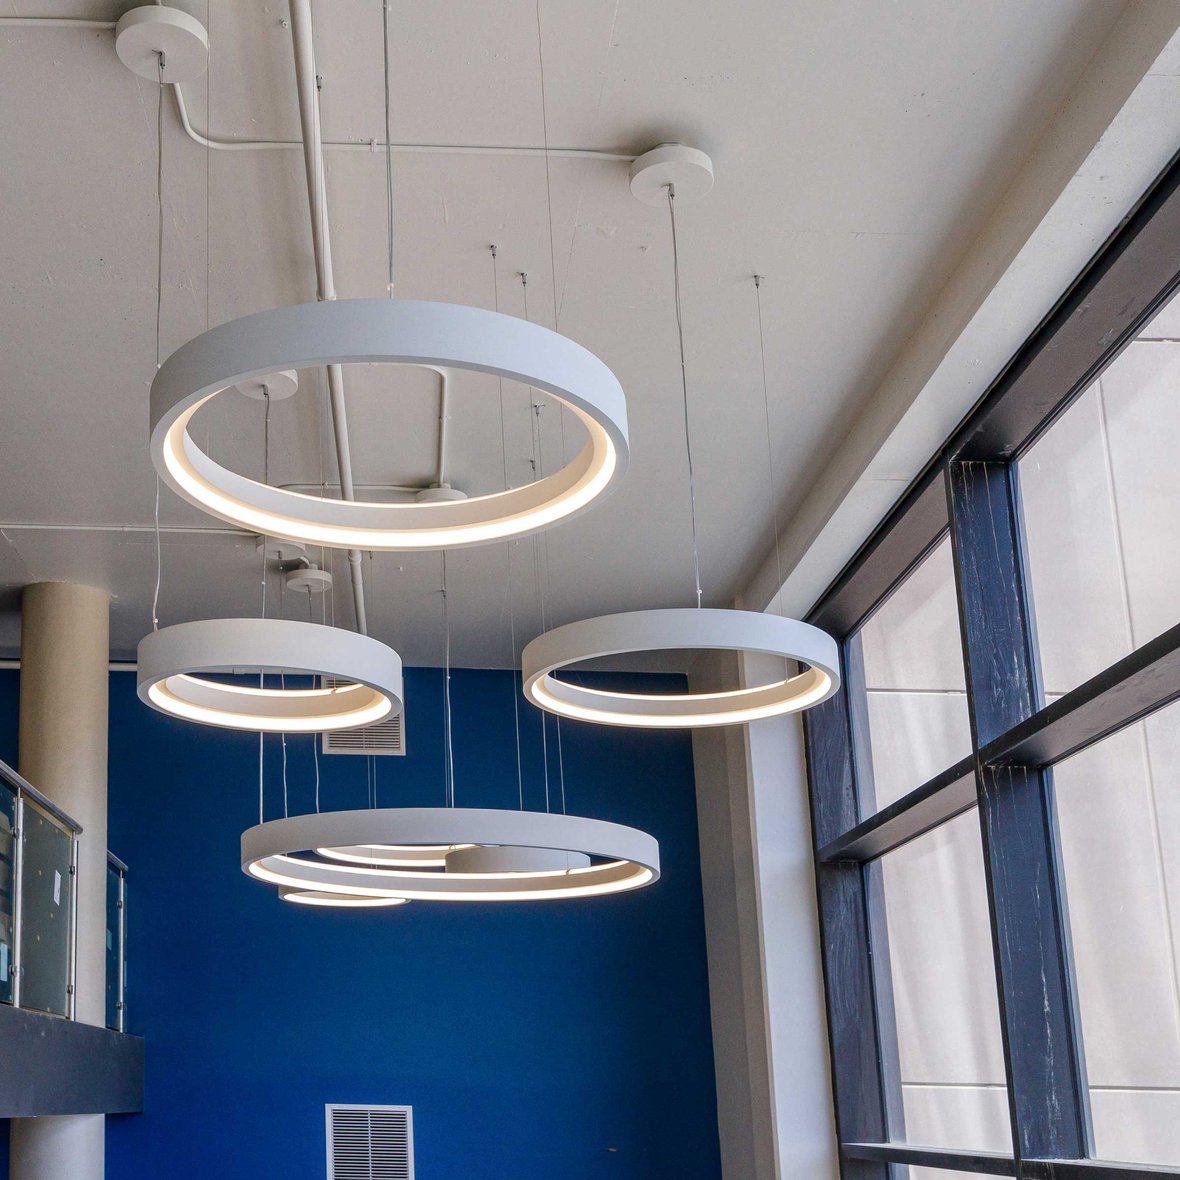 New lighting installed in interior entry of UW-Madison Sellery Hall student housing